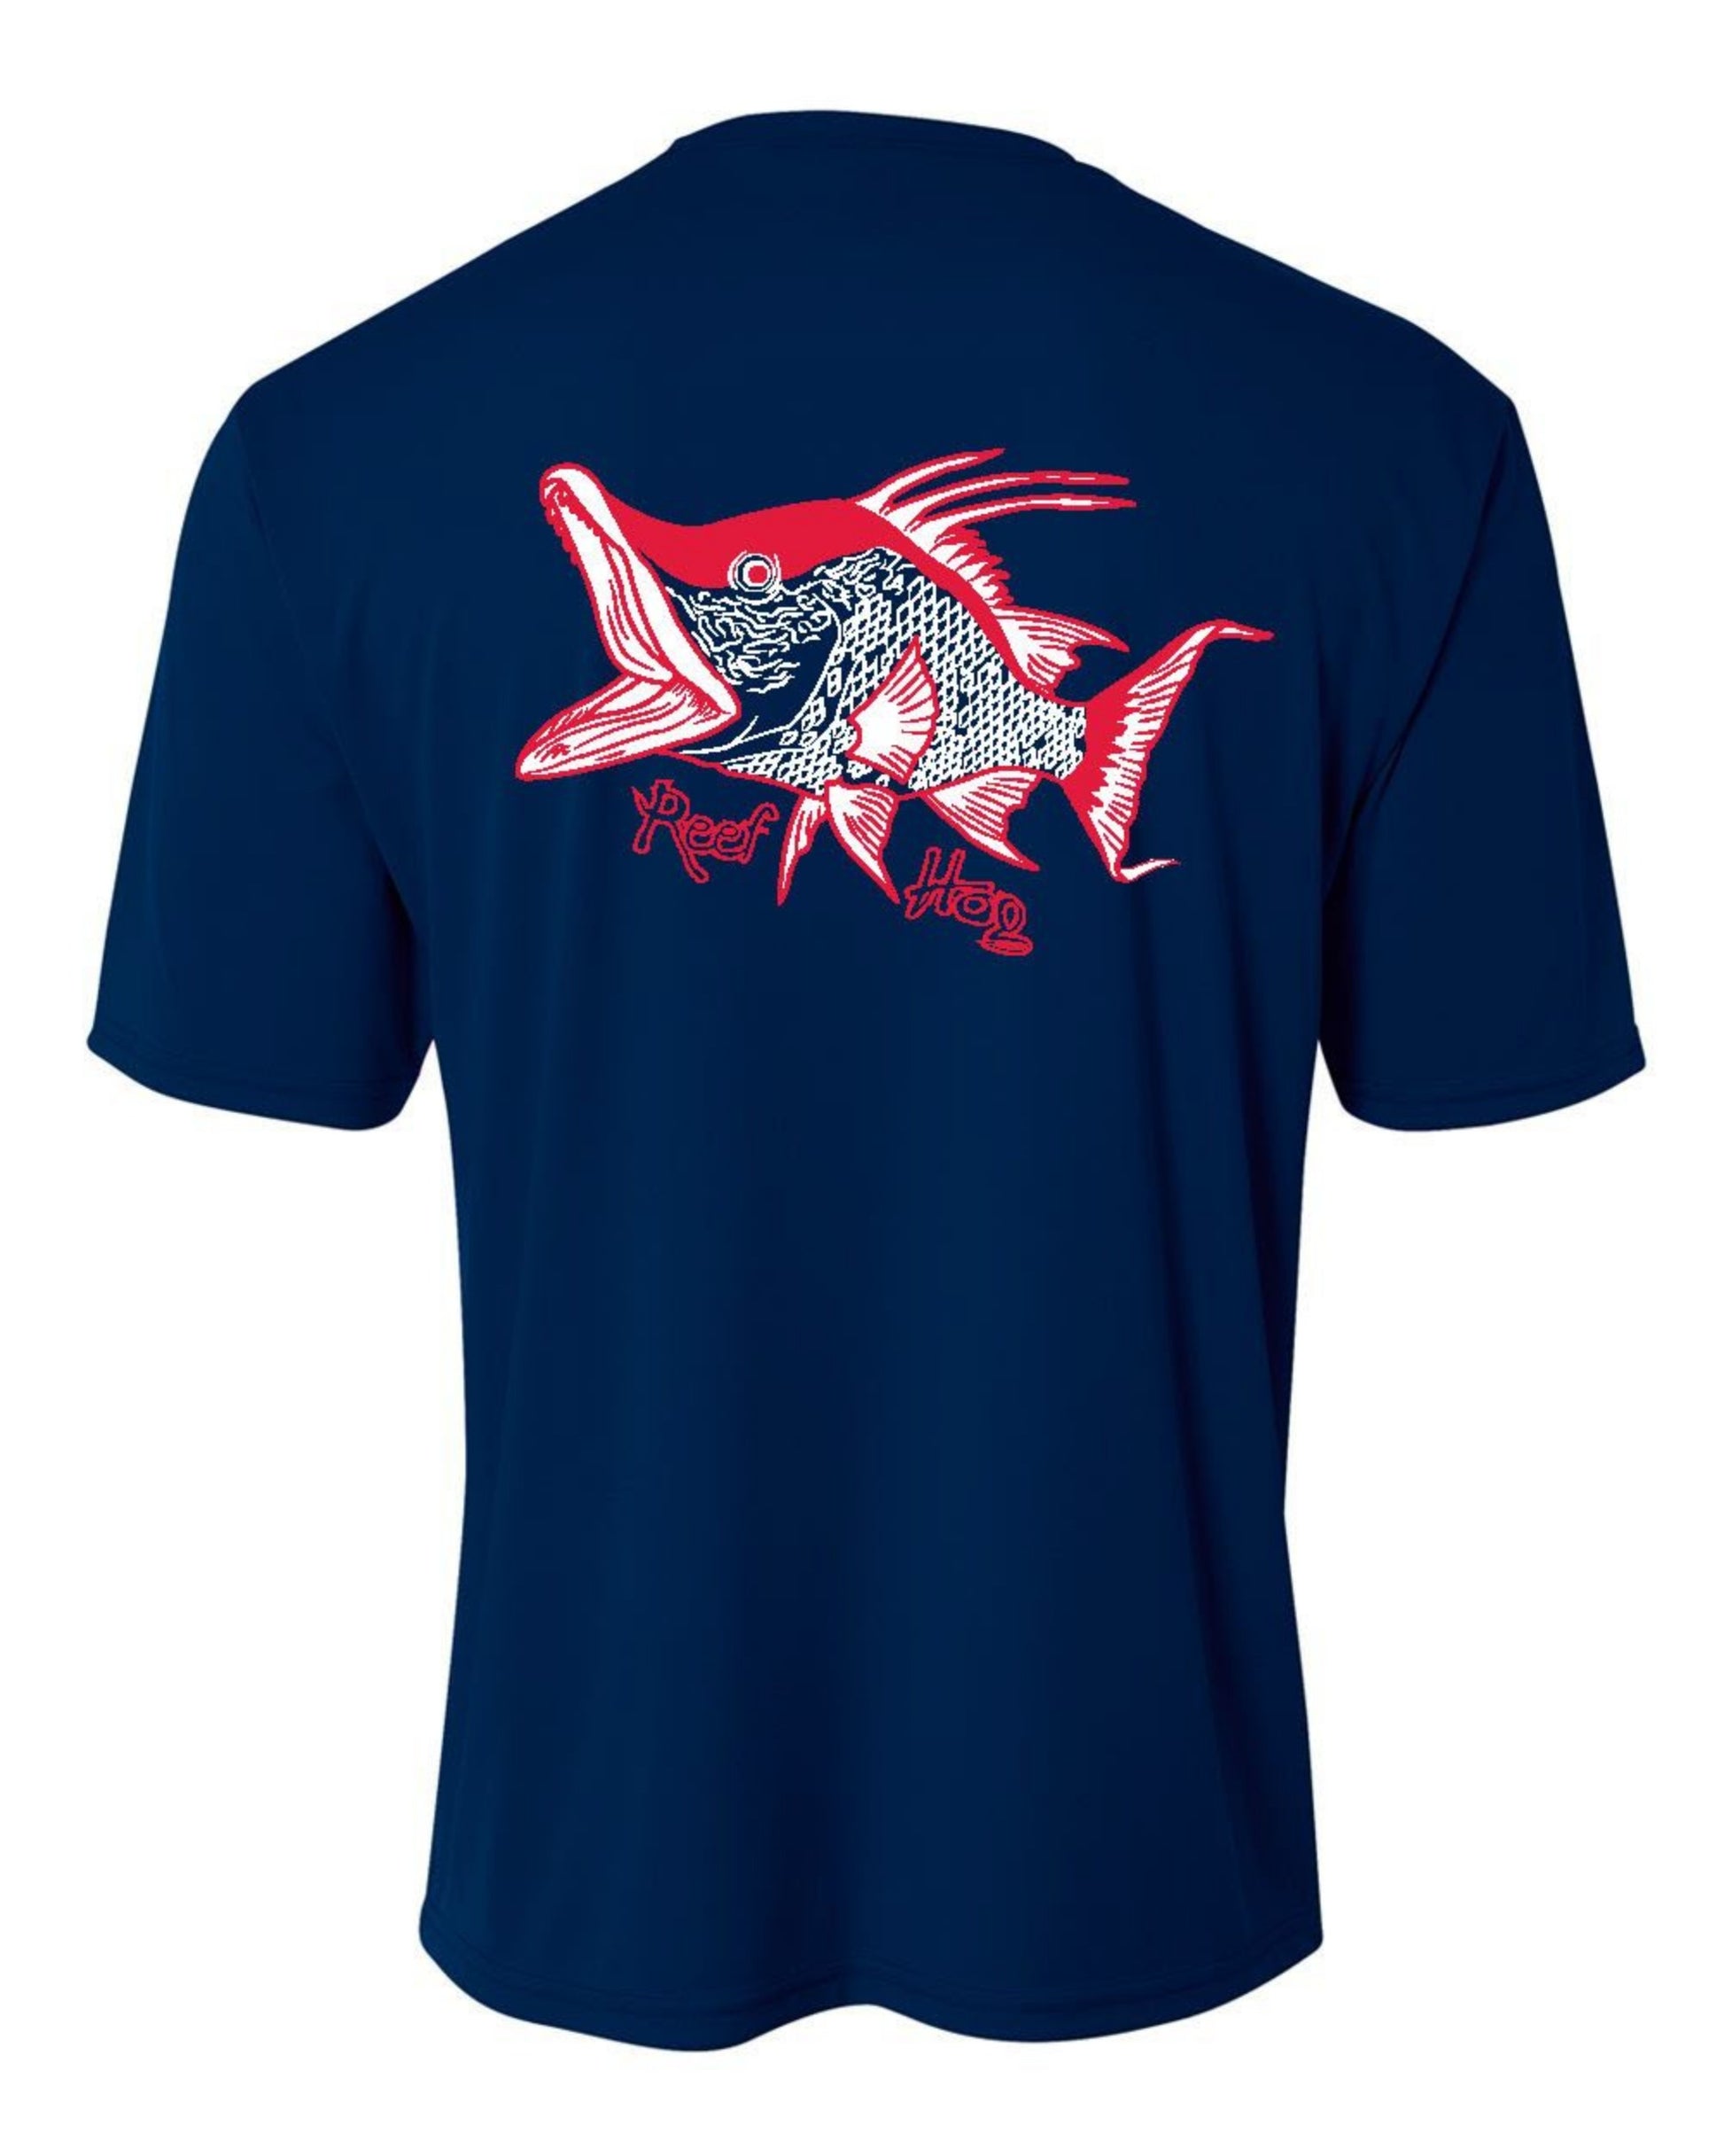 Navy Youth New Hogfish "Reef Hog" Short Sleeve Performance Dry-Fit Shirts with Sun Protection by Reel Fishy Apparel